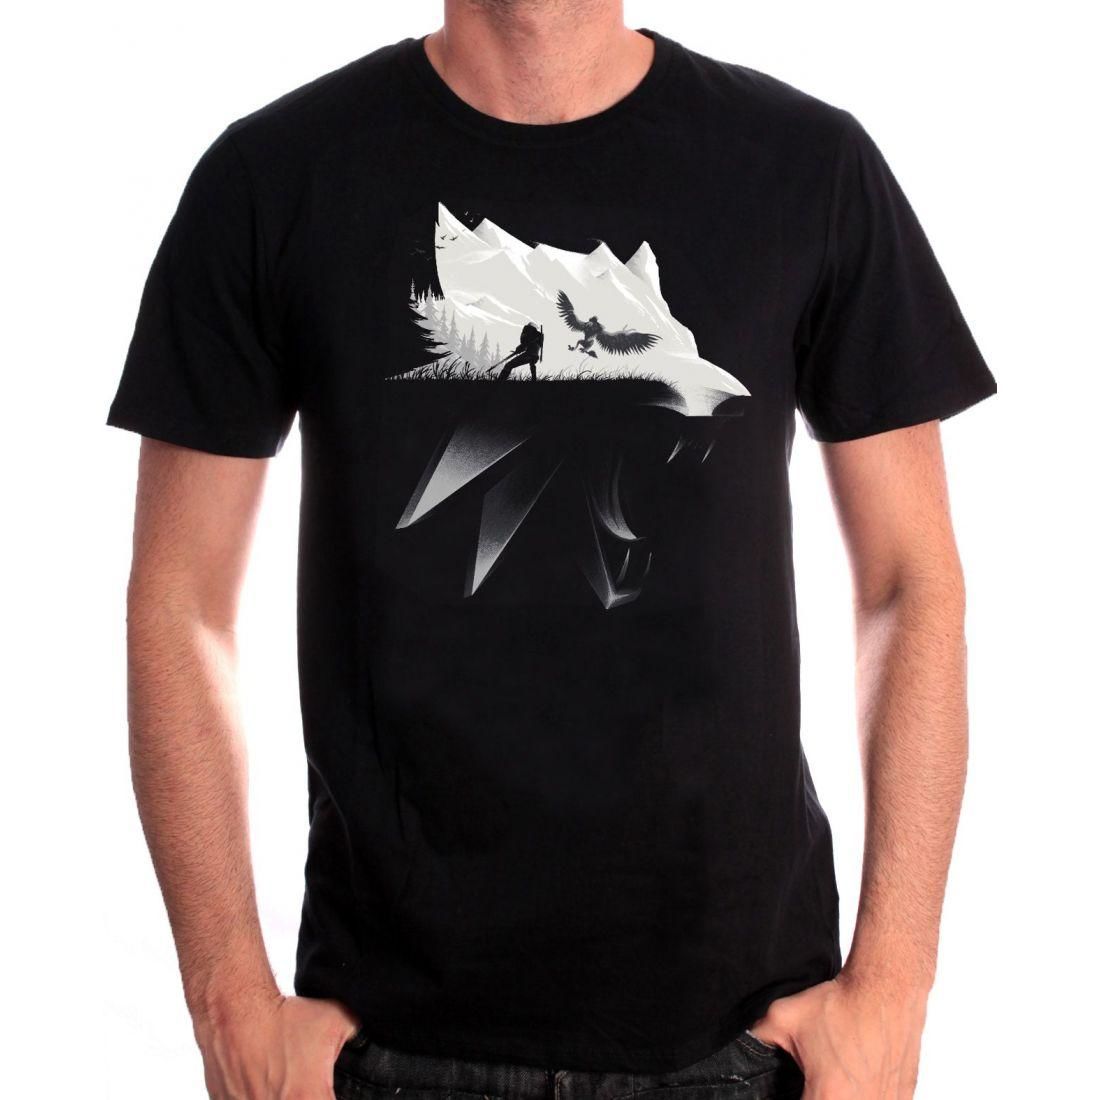 The Witcher 3 - Wolf Silhouette Black T-Shirt - S